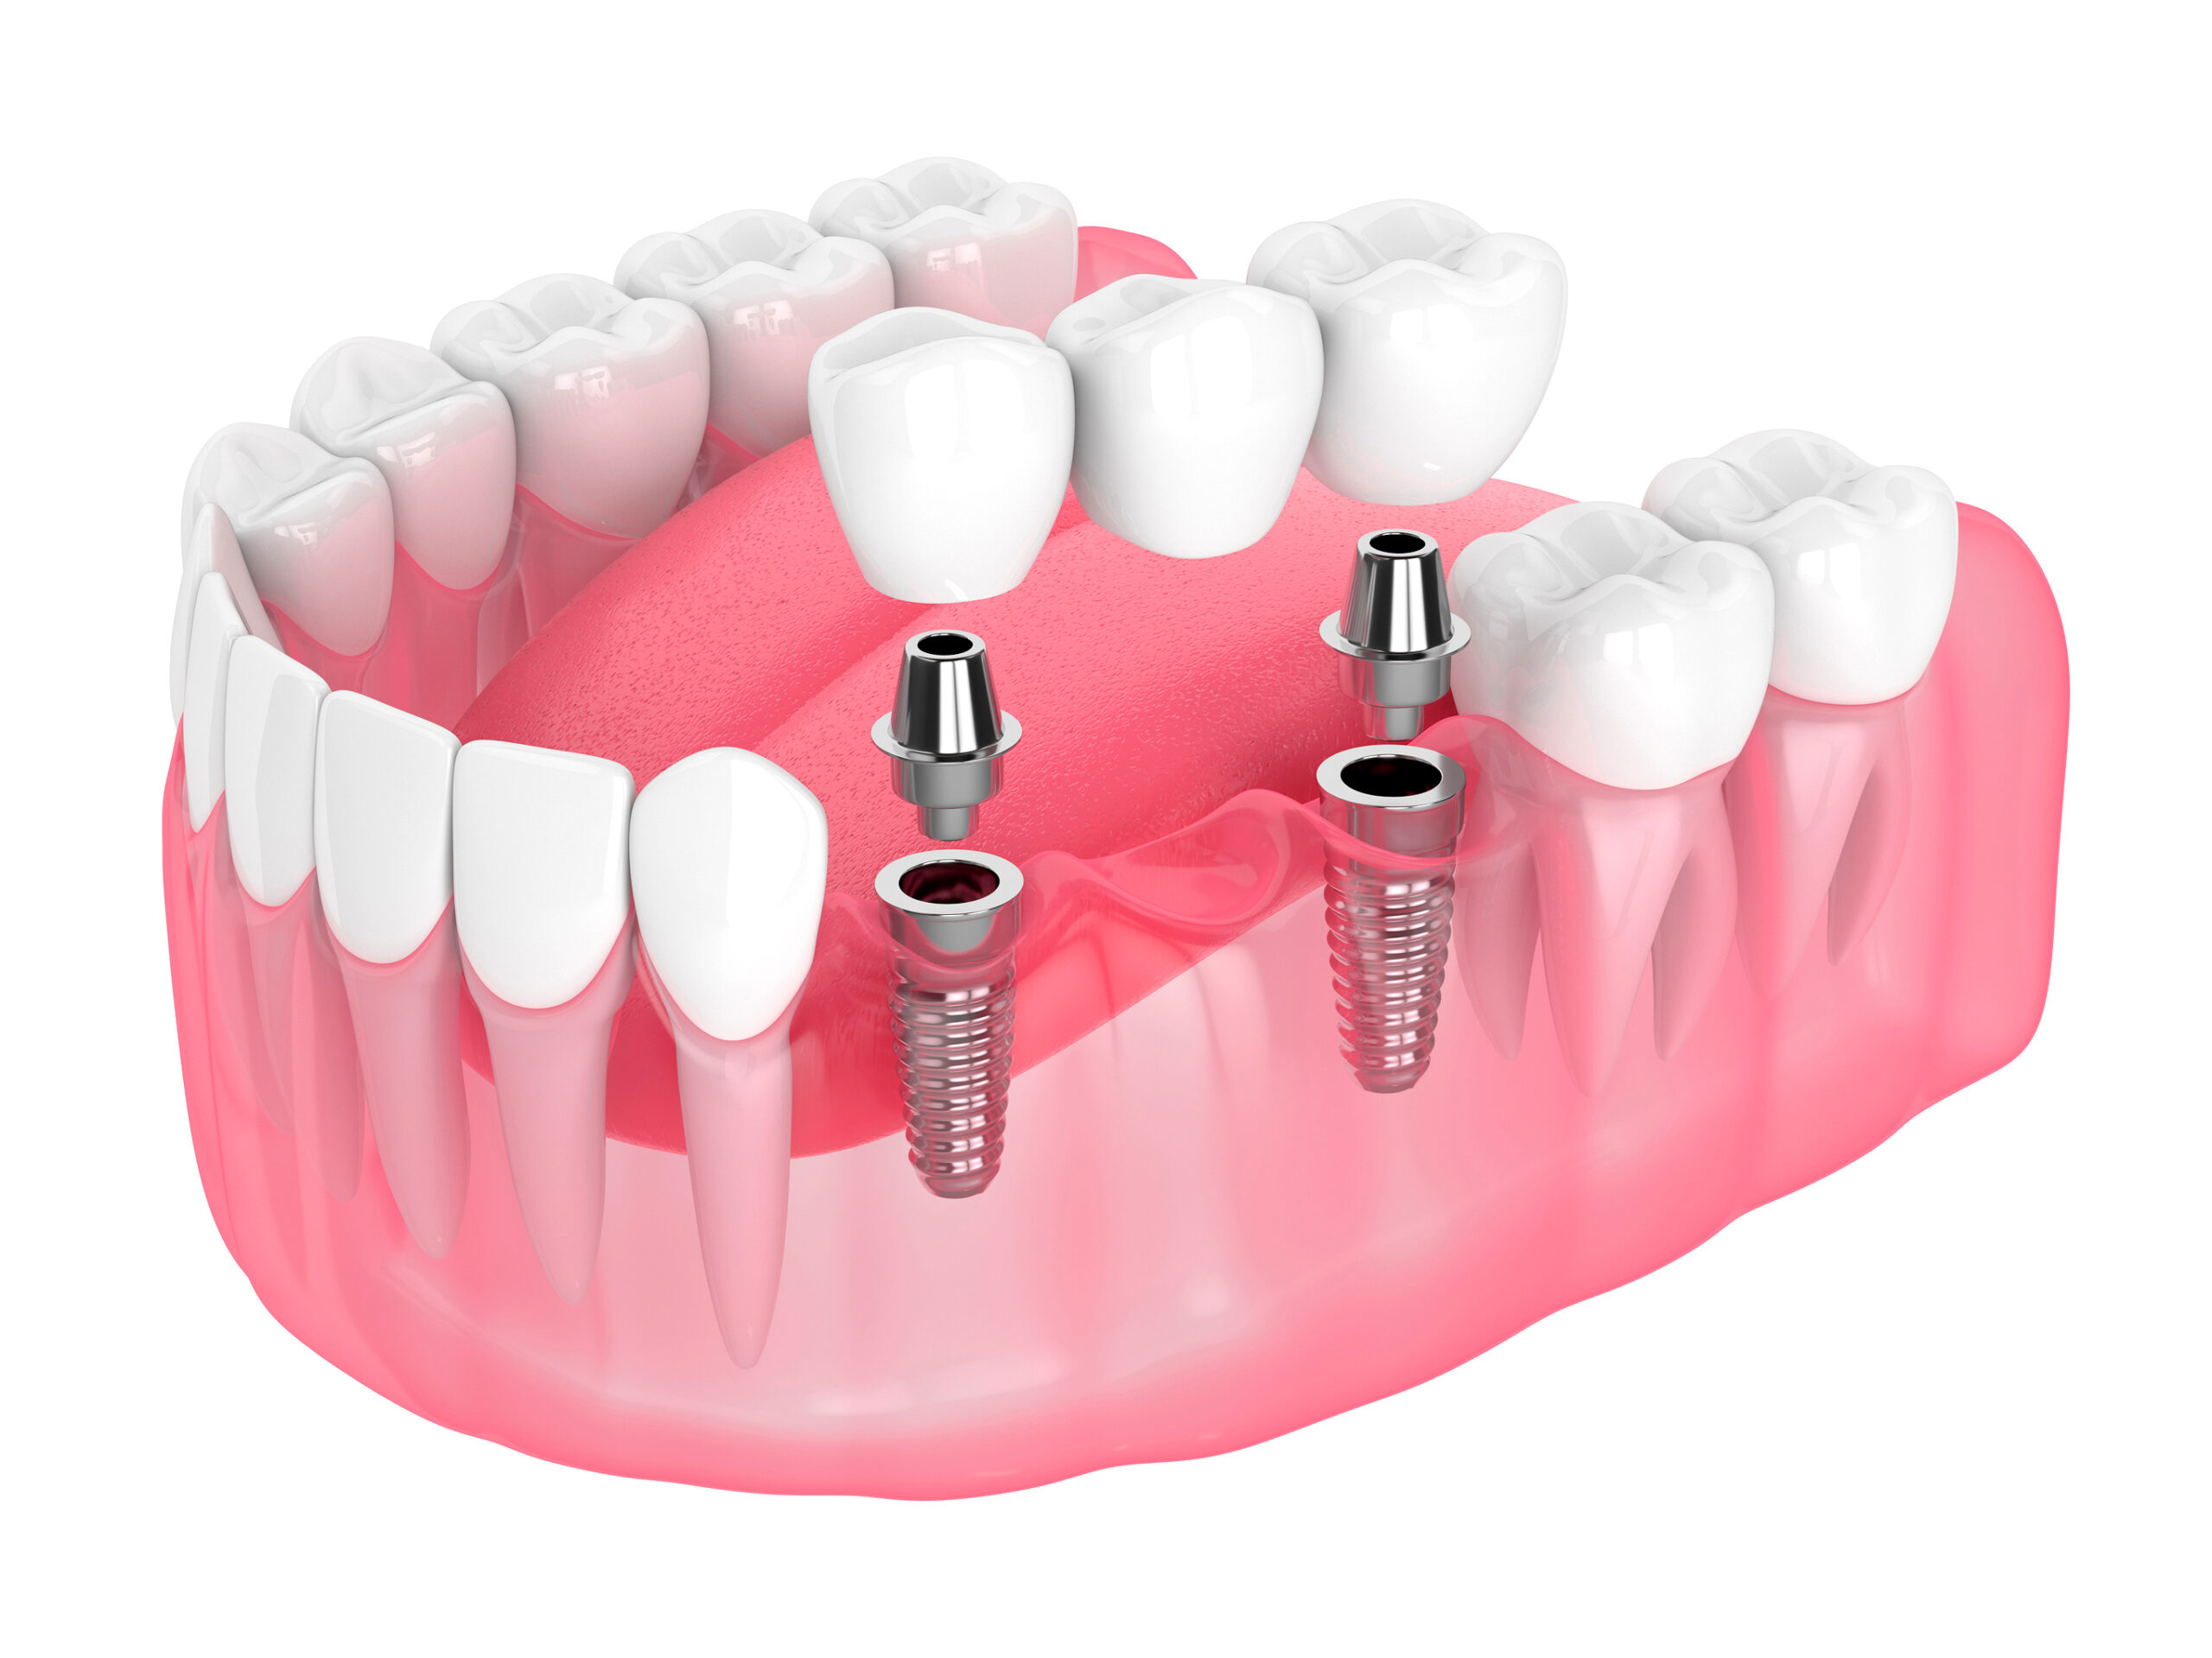 Dentistry Crowns and Bridges | Quality Dental Care | Adelaide, South Australia dentistry crowns and bridges Dentistry Crowns and Bridges | Quality Dental Care | Adelaide, South Australia 38386533b7c34f6b9dabc2258b2af172 scaled